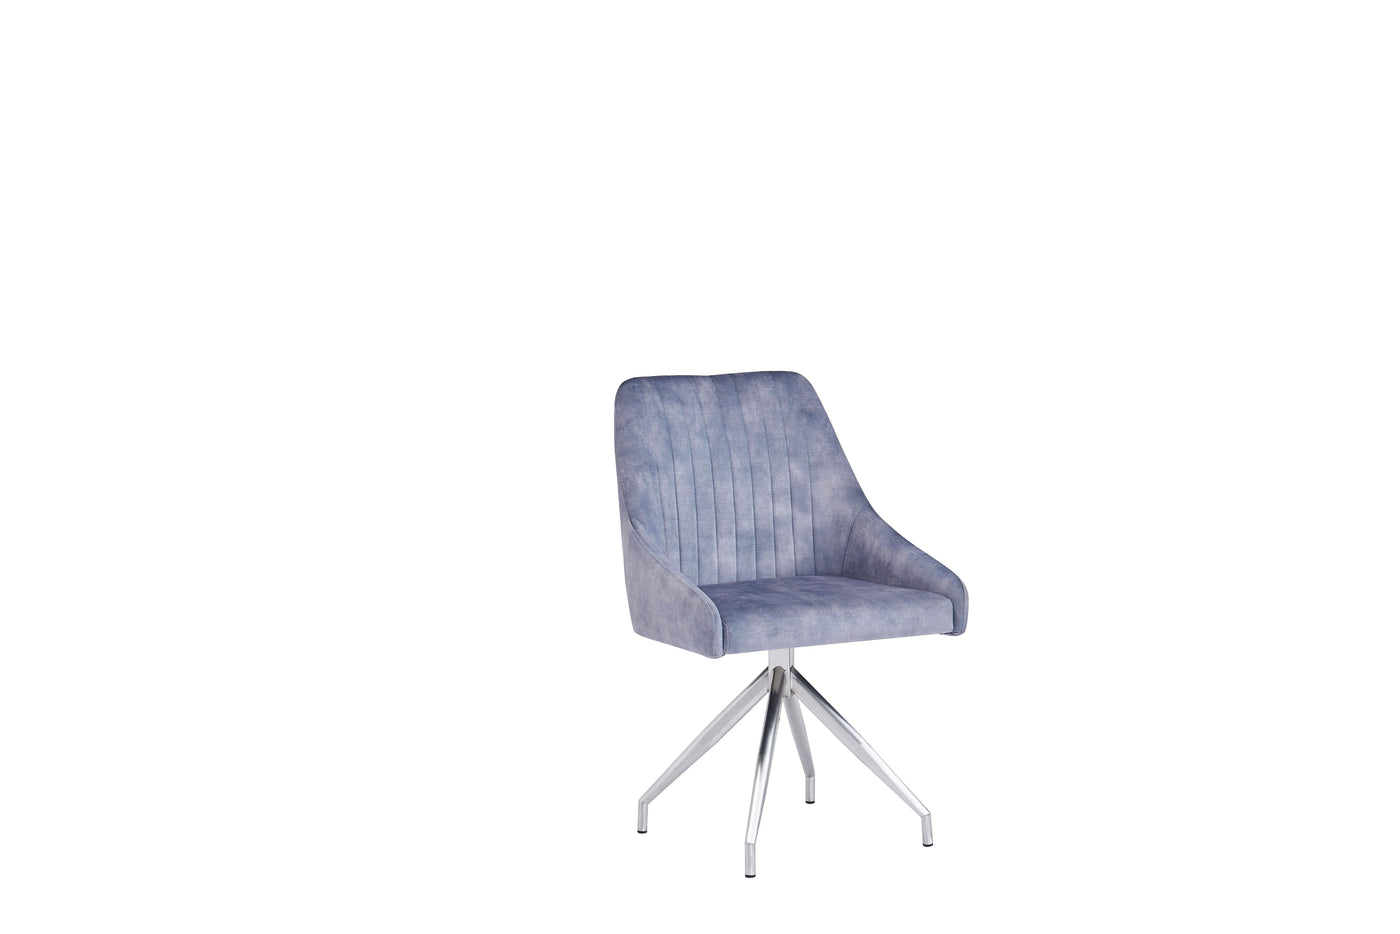 Giorgio Swivel Velvet Dining Chairs With Brushed Silver Base in 3 Colours - Pairs